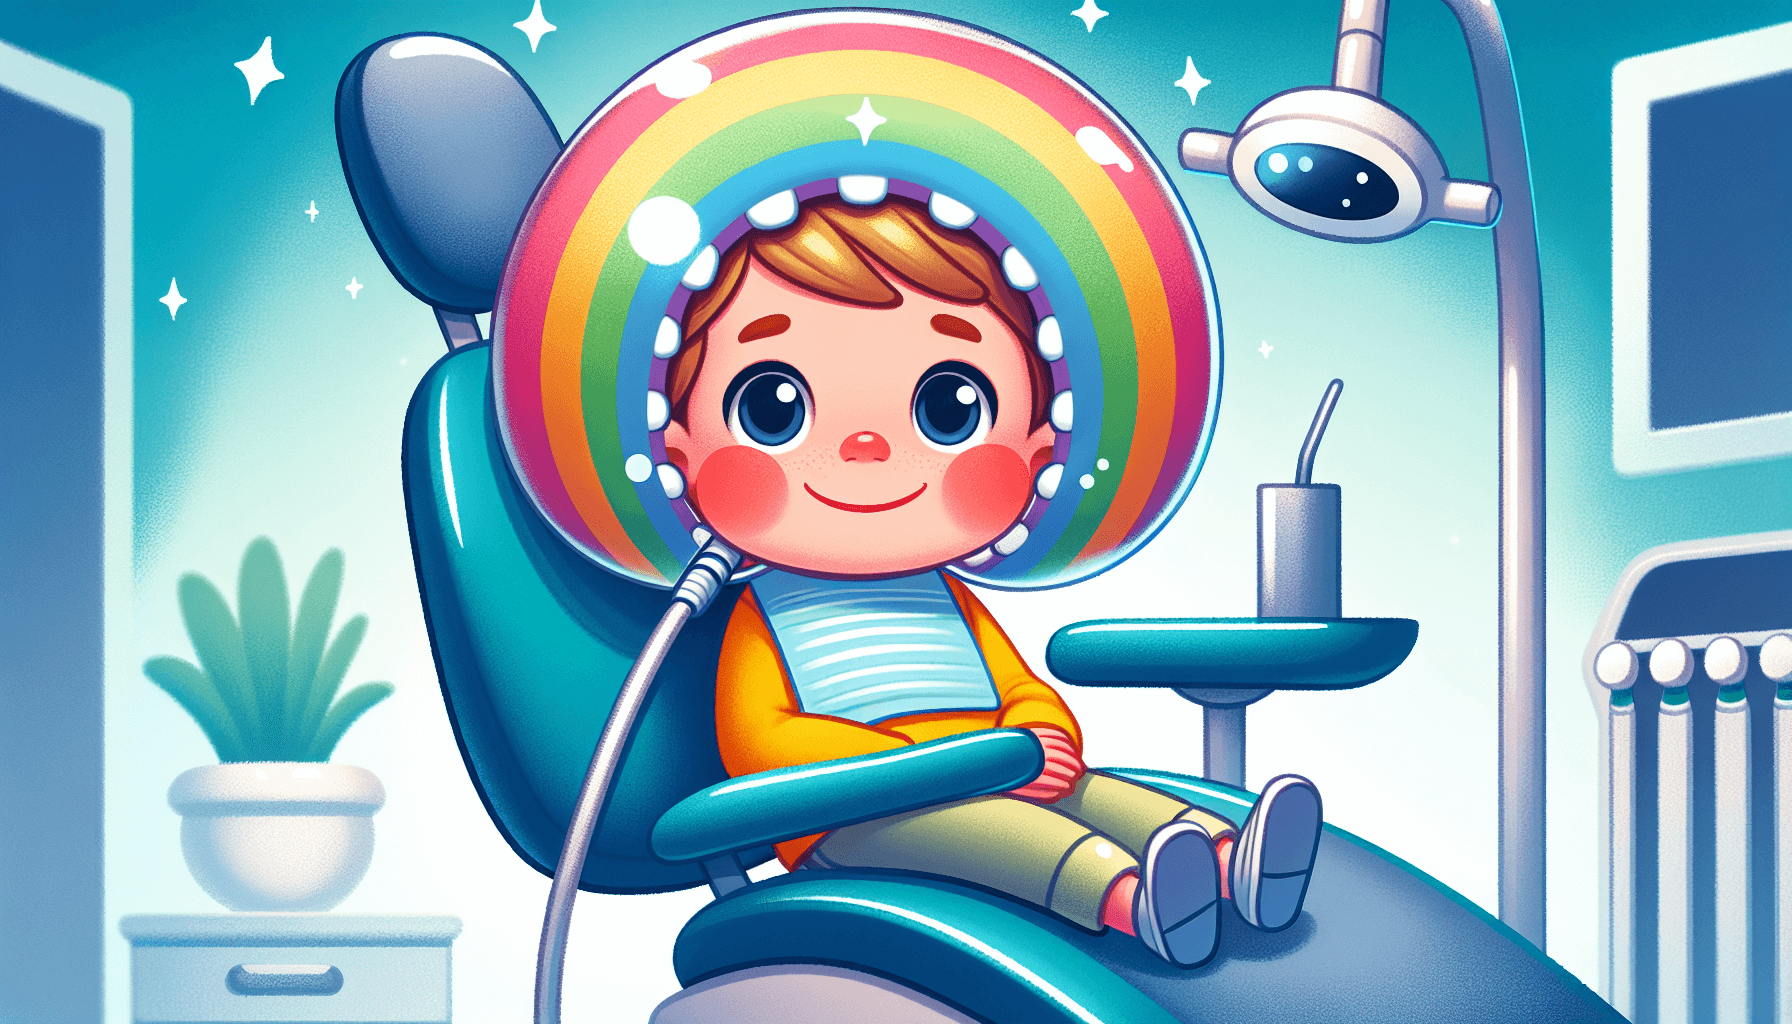 Illustration of a child smiling while receiving nitrous oxide sedation at the dentist